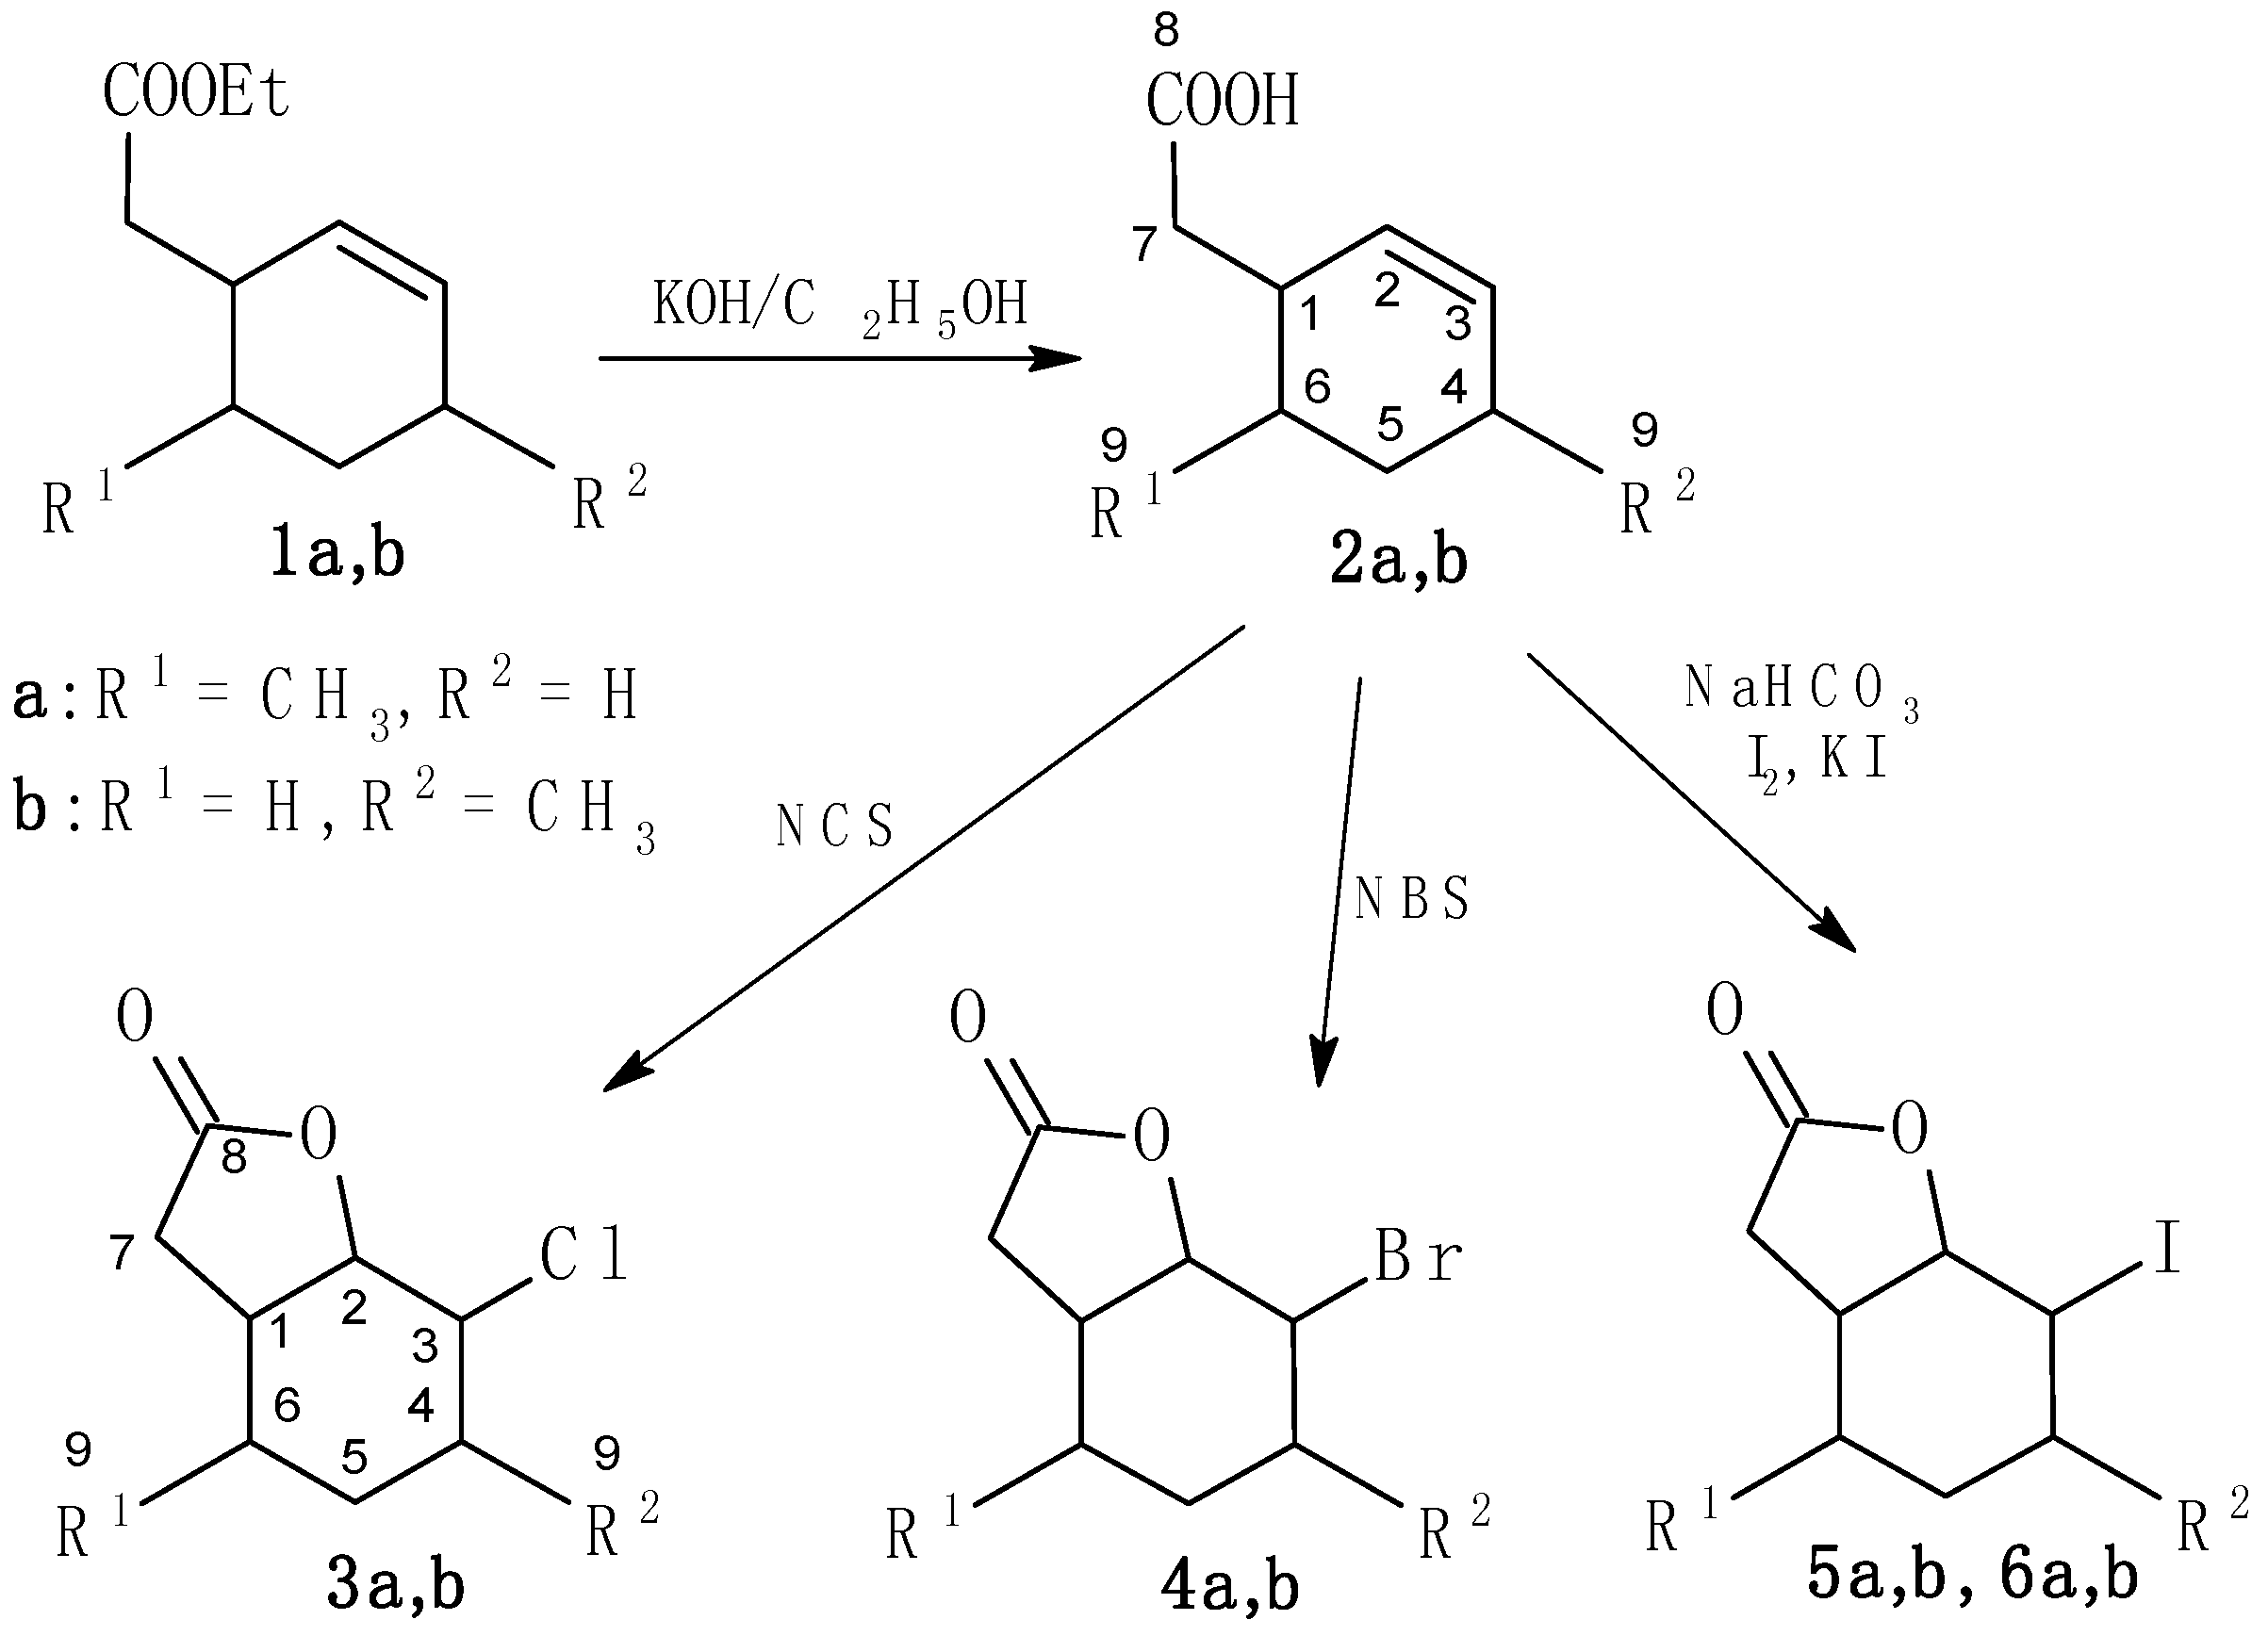 2.1. Synthesis of Substrates 